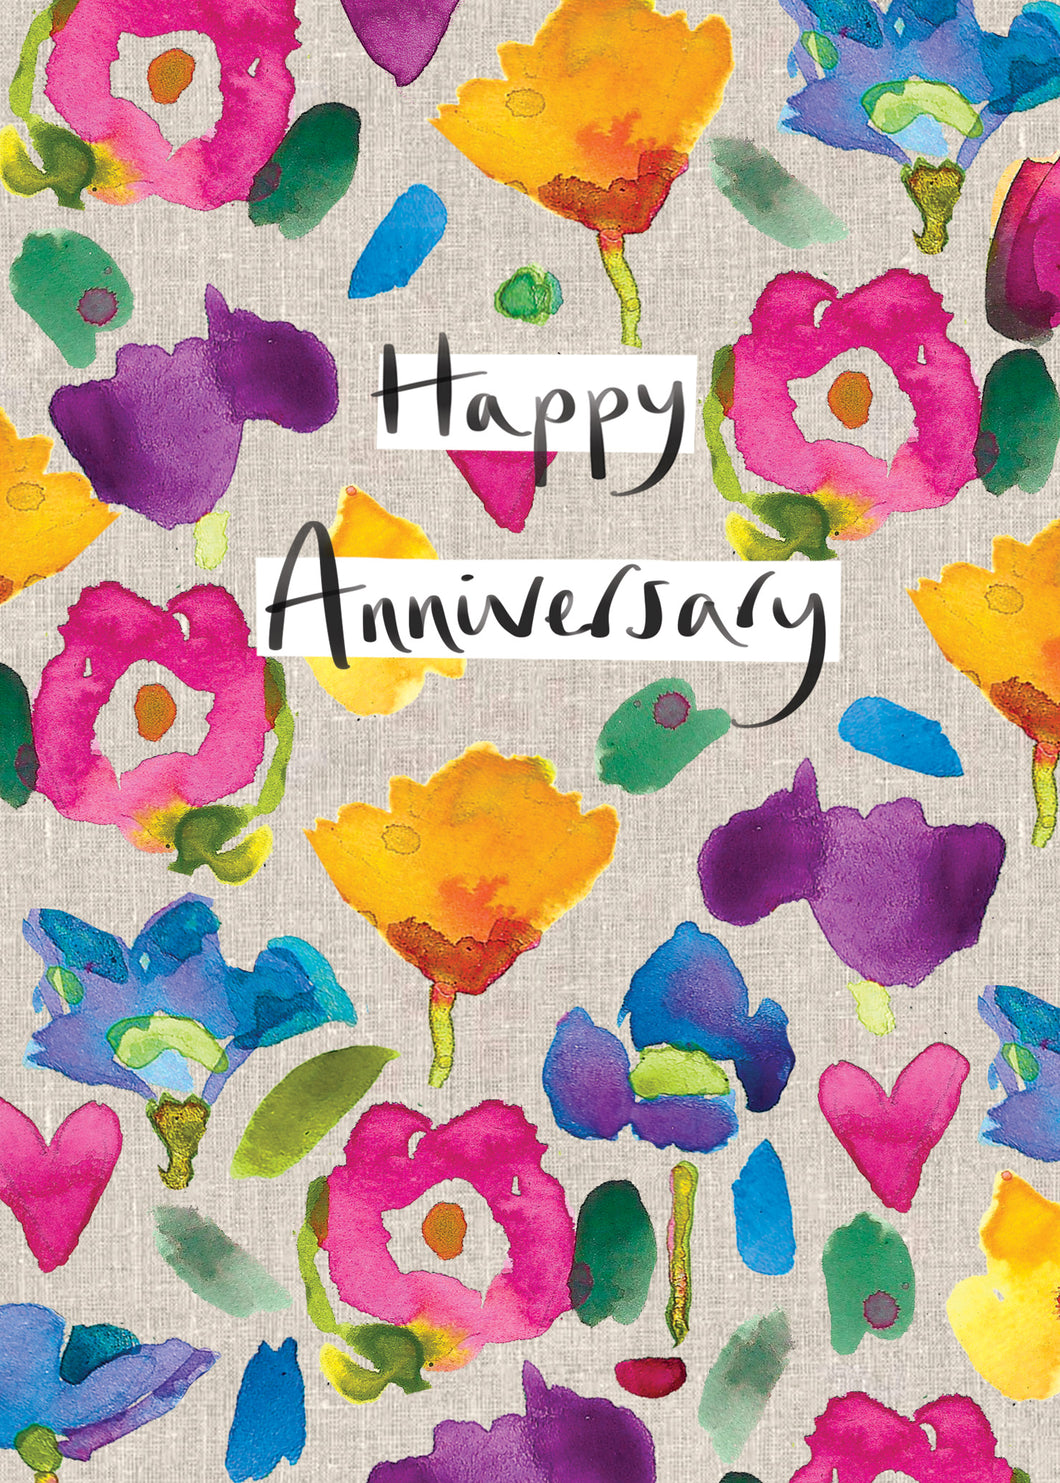 Happy anniversary - inky floral